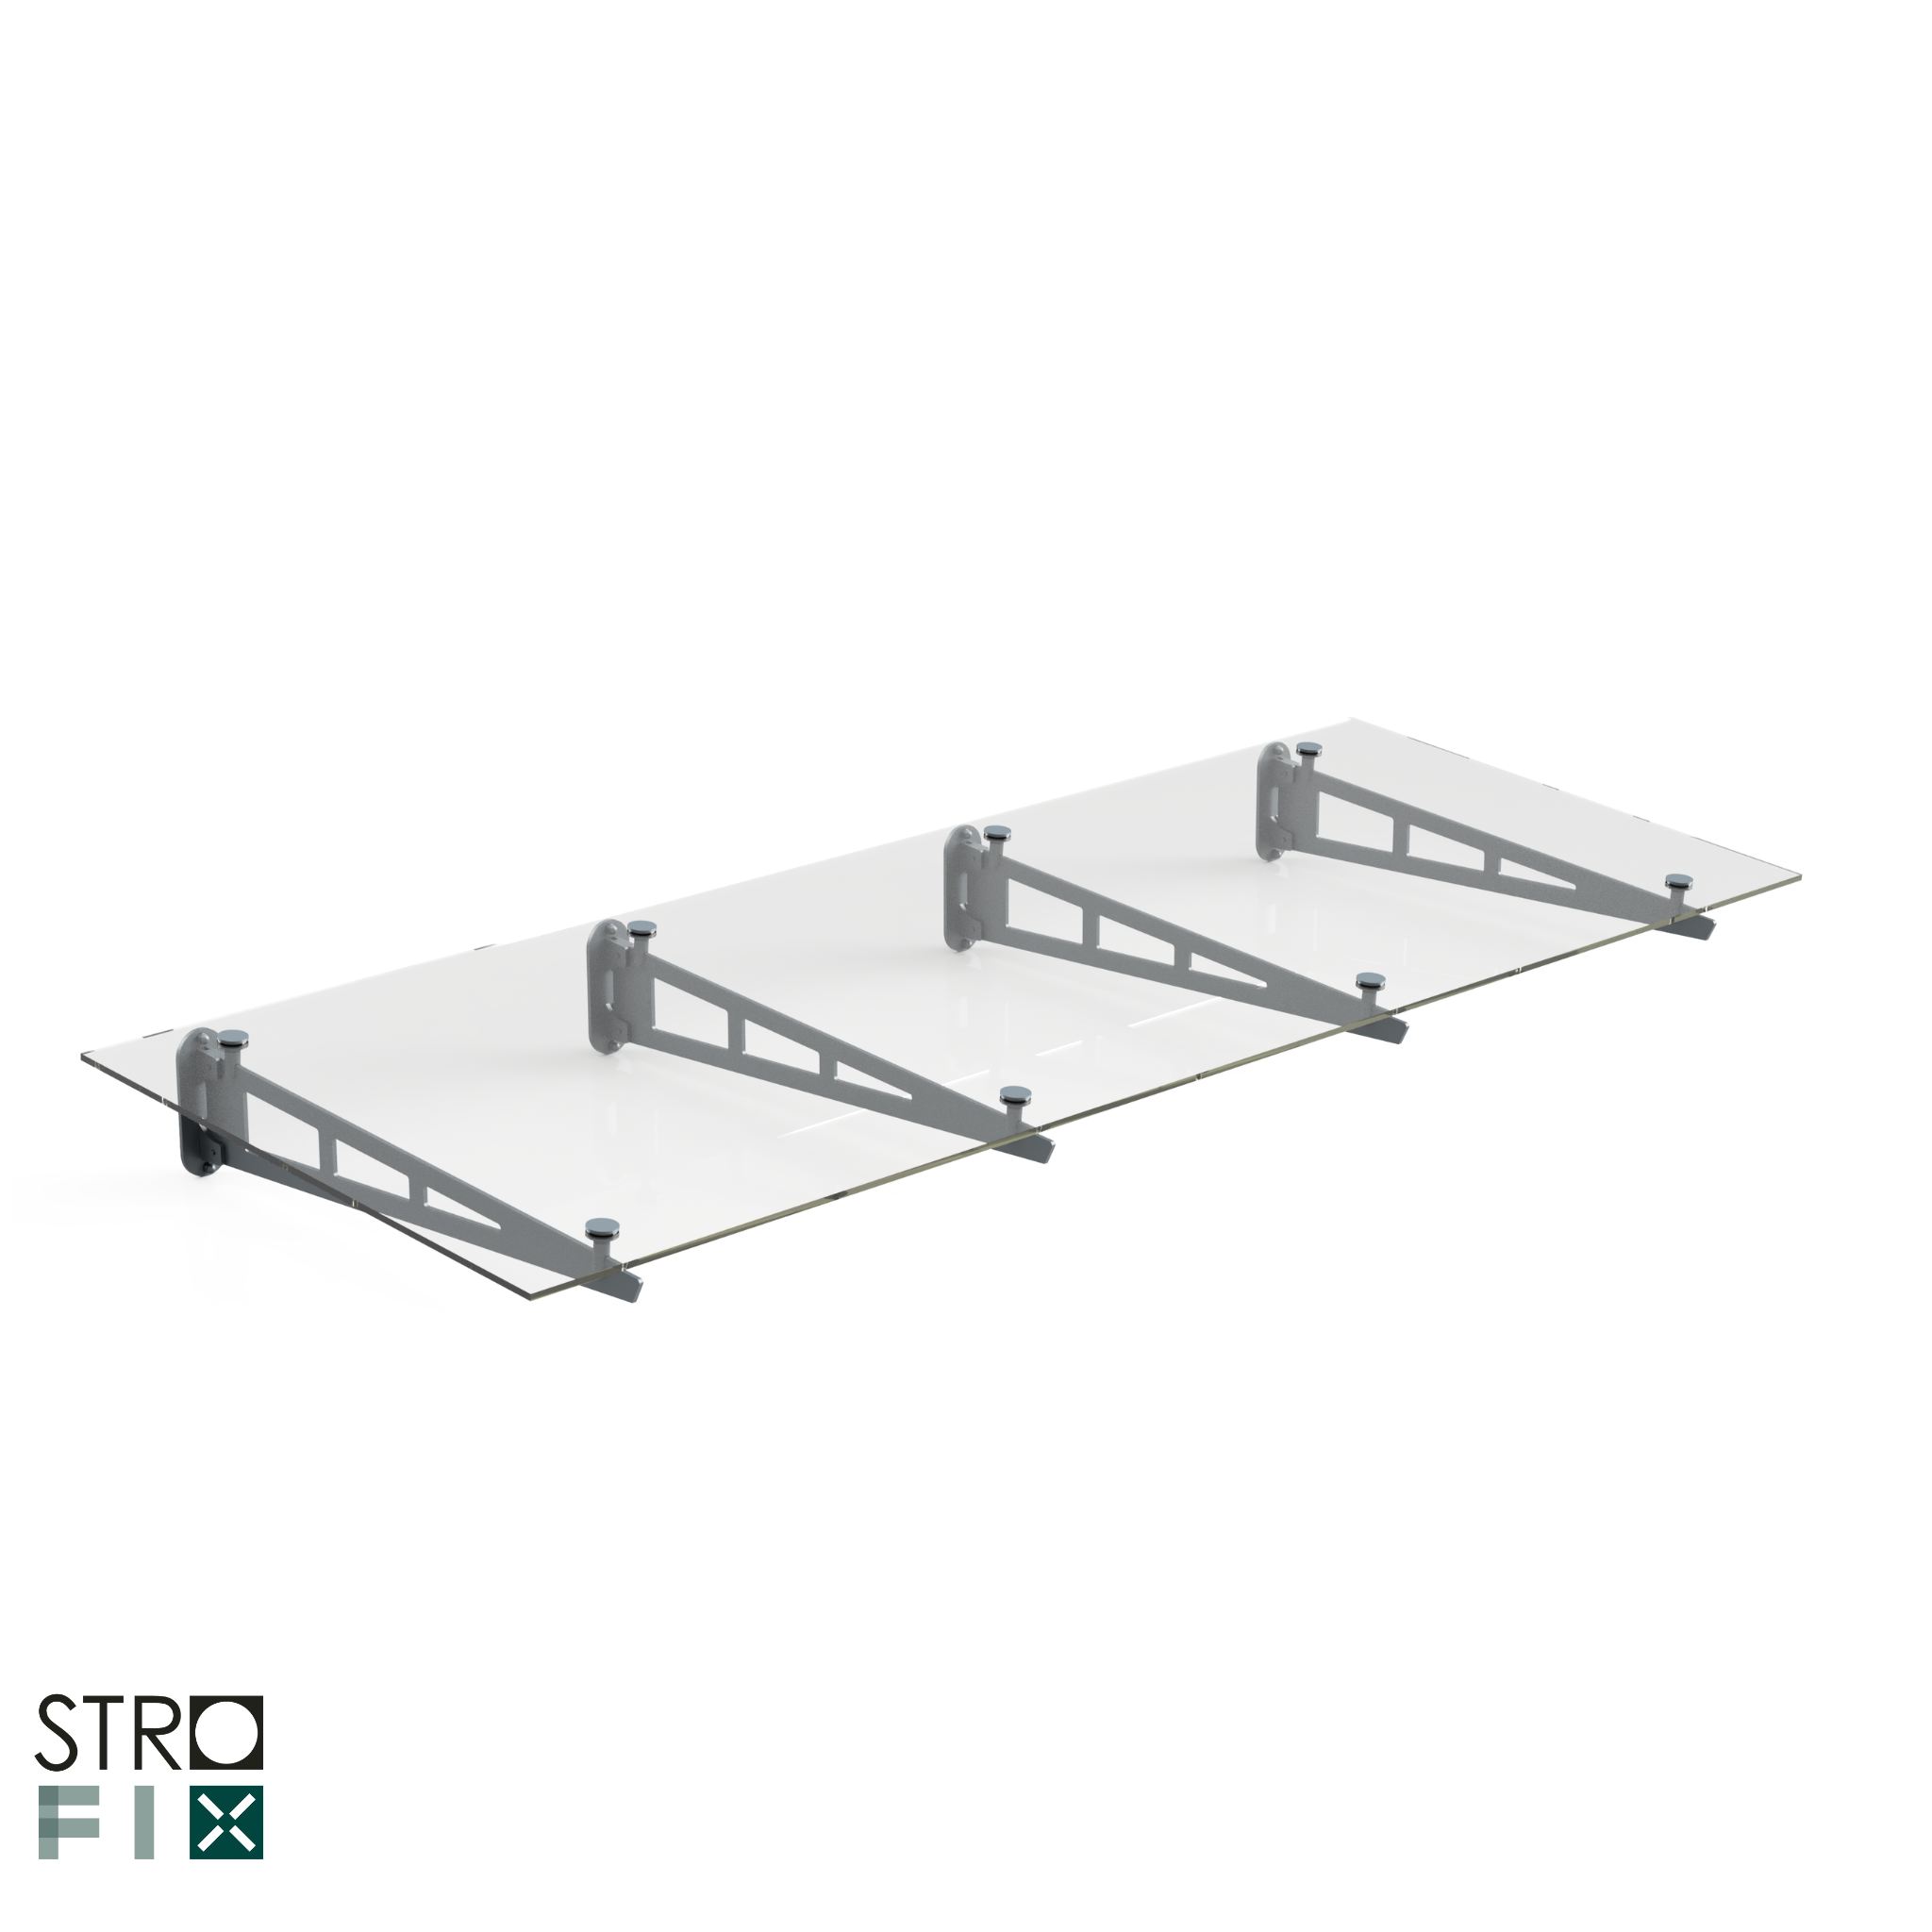 Glass canopy on 4 supports - StroFIX